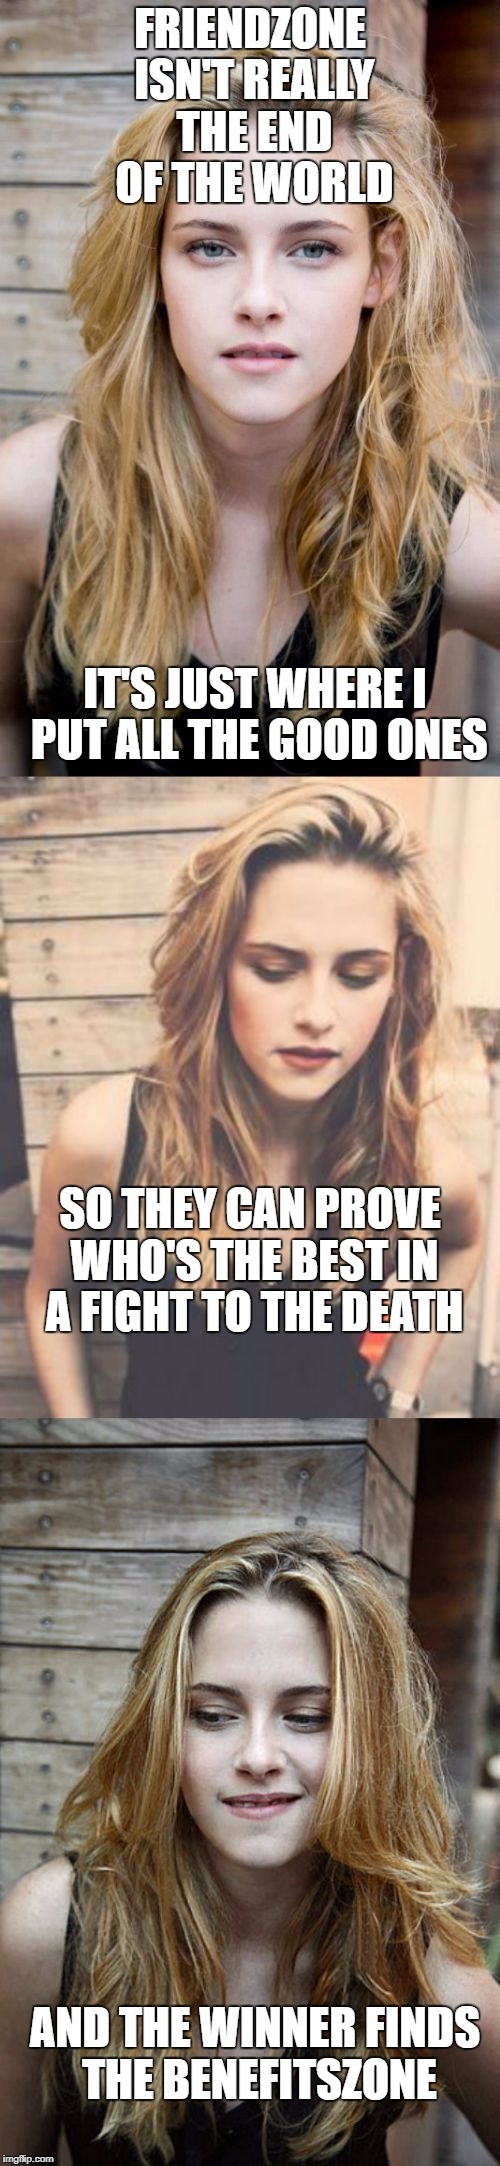 Bad Pun Kristen Stewart 2 | FRIENDZONE ISN'T REALLY THE END OF THE WORLD; IT'S JUST WHERE I PUT ALL THE GOOD ONES; SO THEY CAN PROVE WHO'S THE BEST IN A FIGHT TO THE DEATH; AND THE WINNER FINDS THE BENEFITSZONE | image tagged in bad pun kristen stewart 2 | made w/ Imgflip meme maker